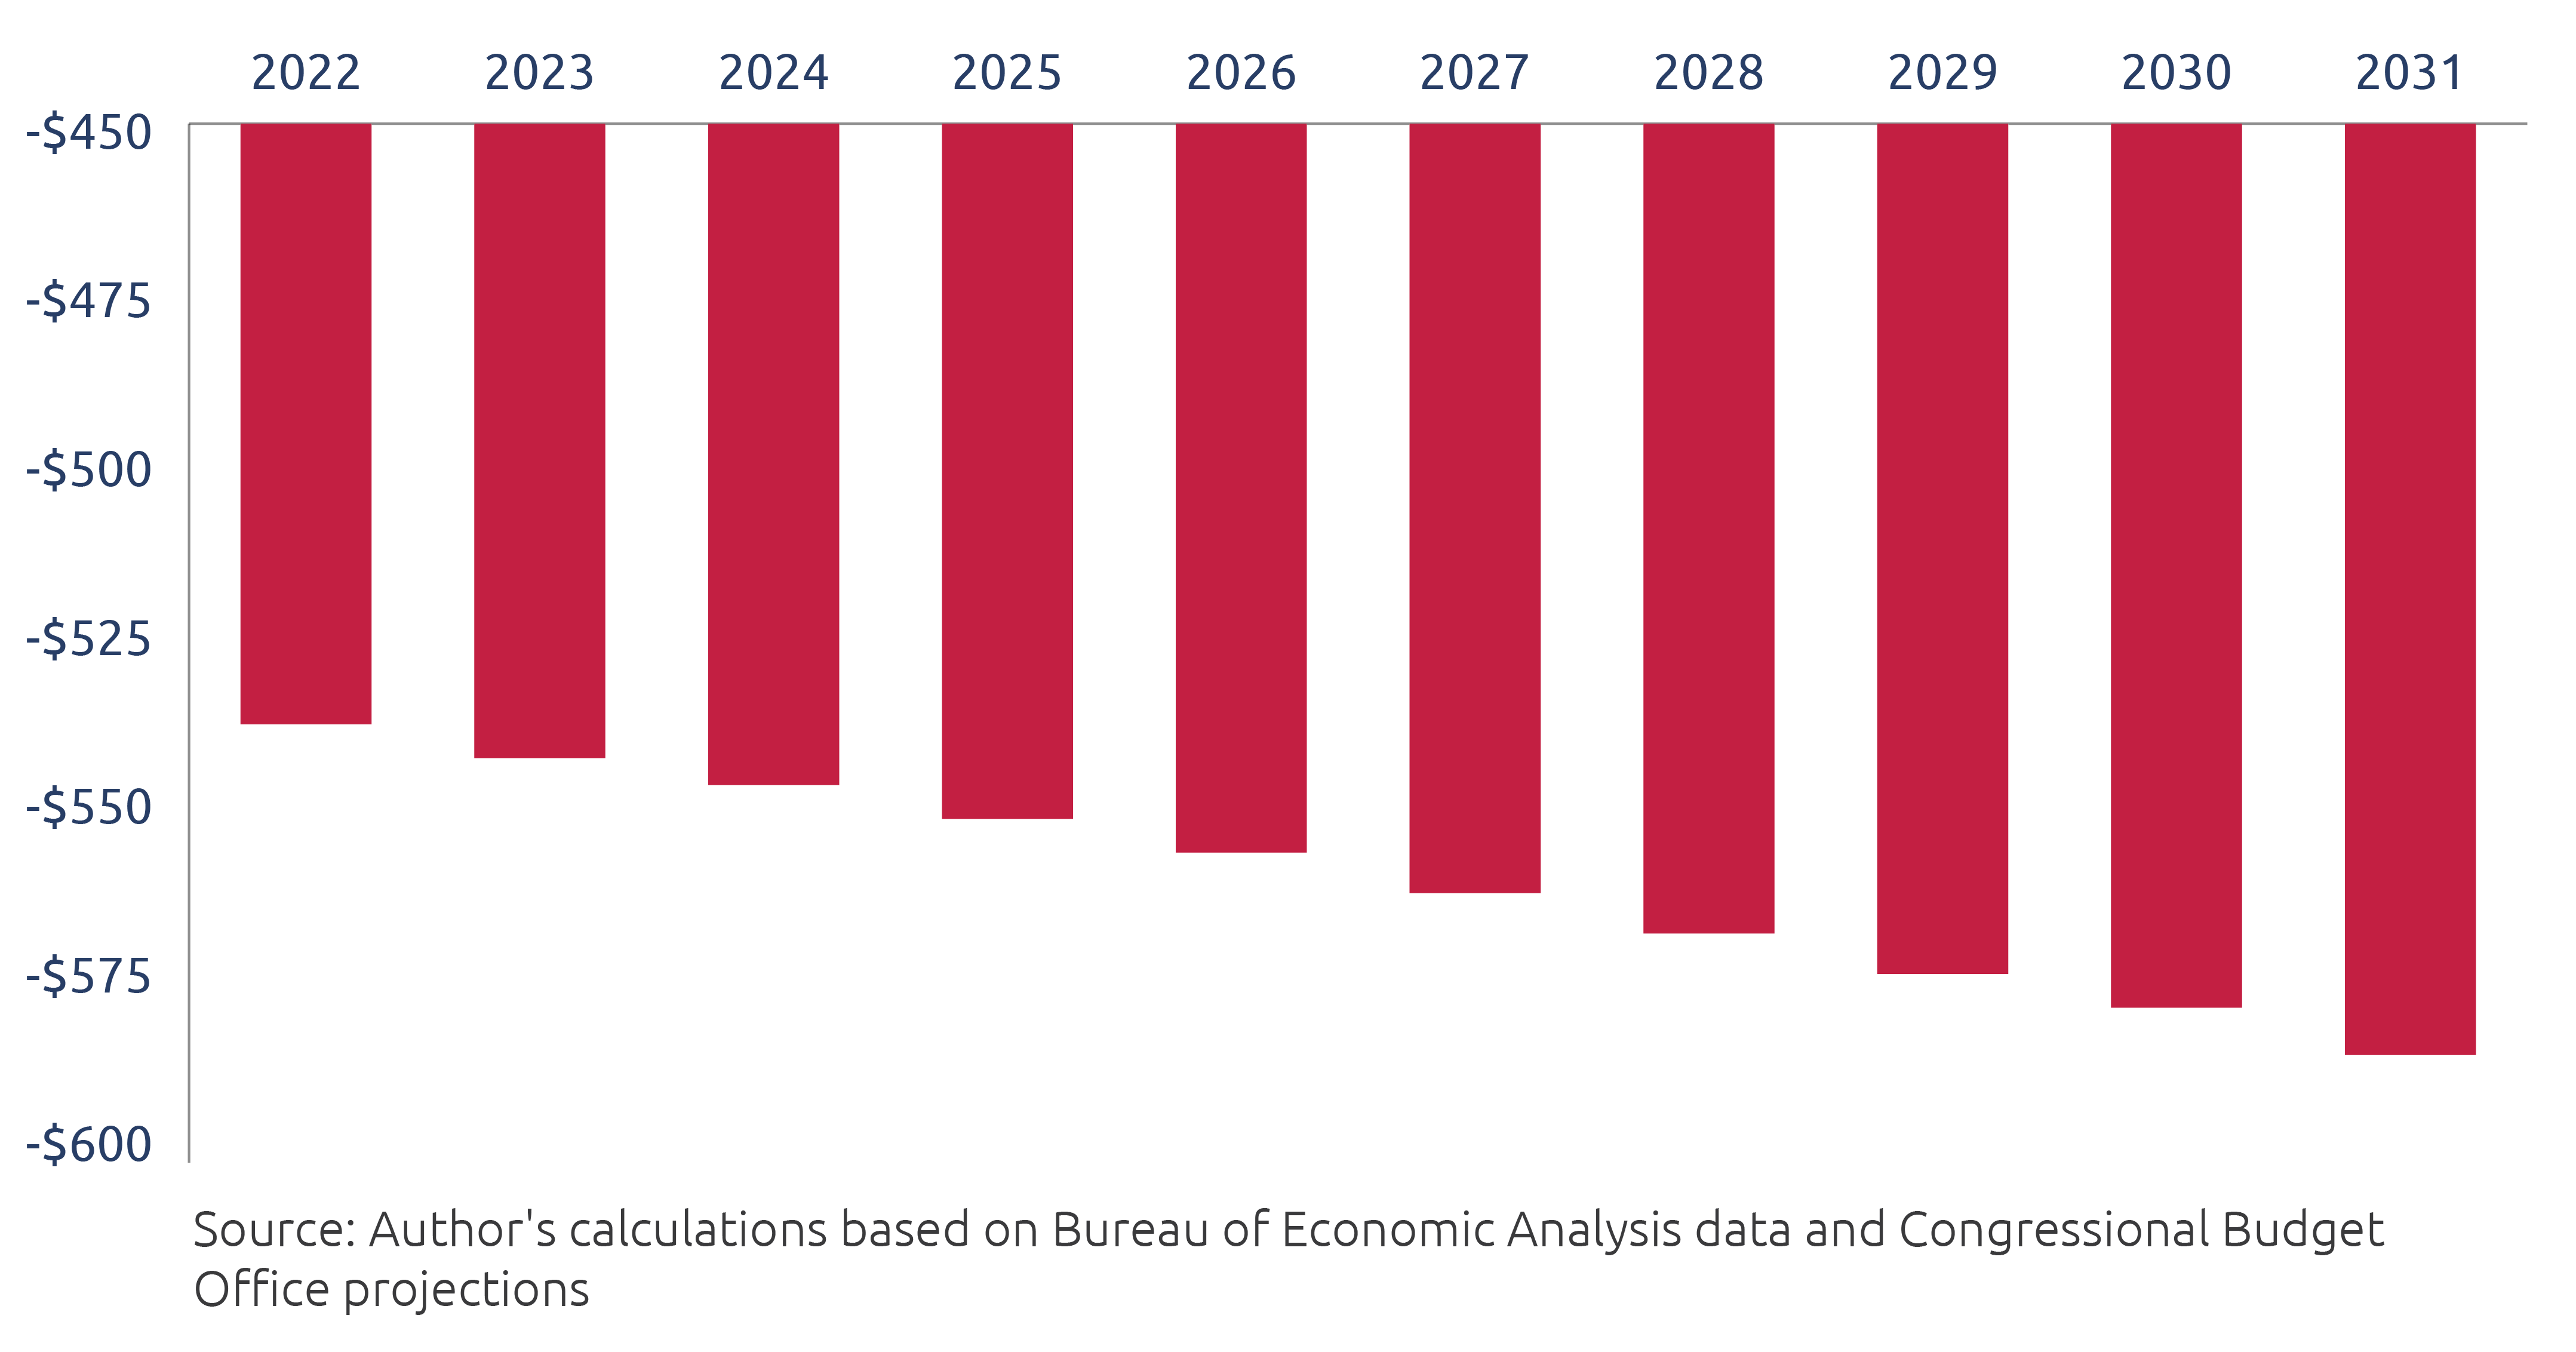 The negative effects of the taxes in the BBBA would reduce economic growth by $539 million-$588 million annually over the next 10 years relative to pre- BBBA baseline.